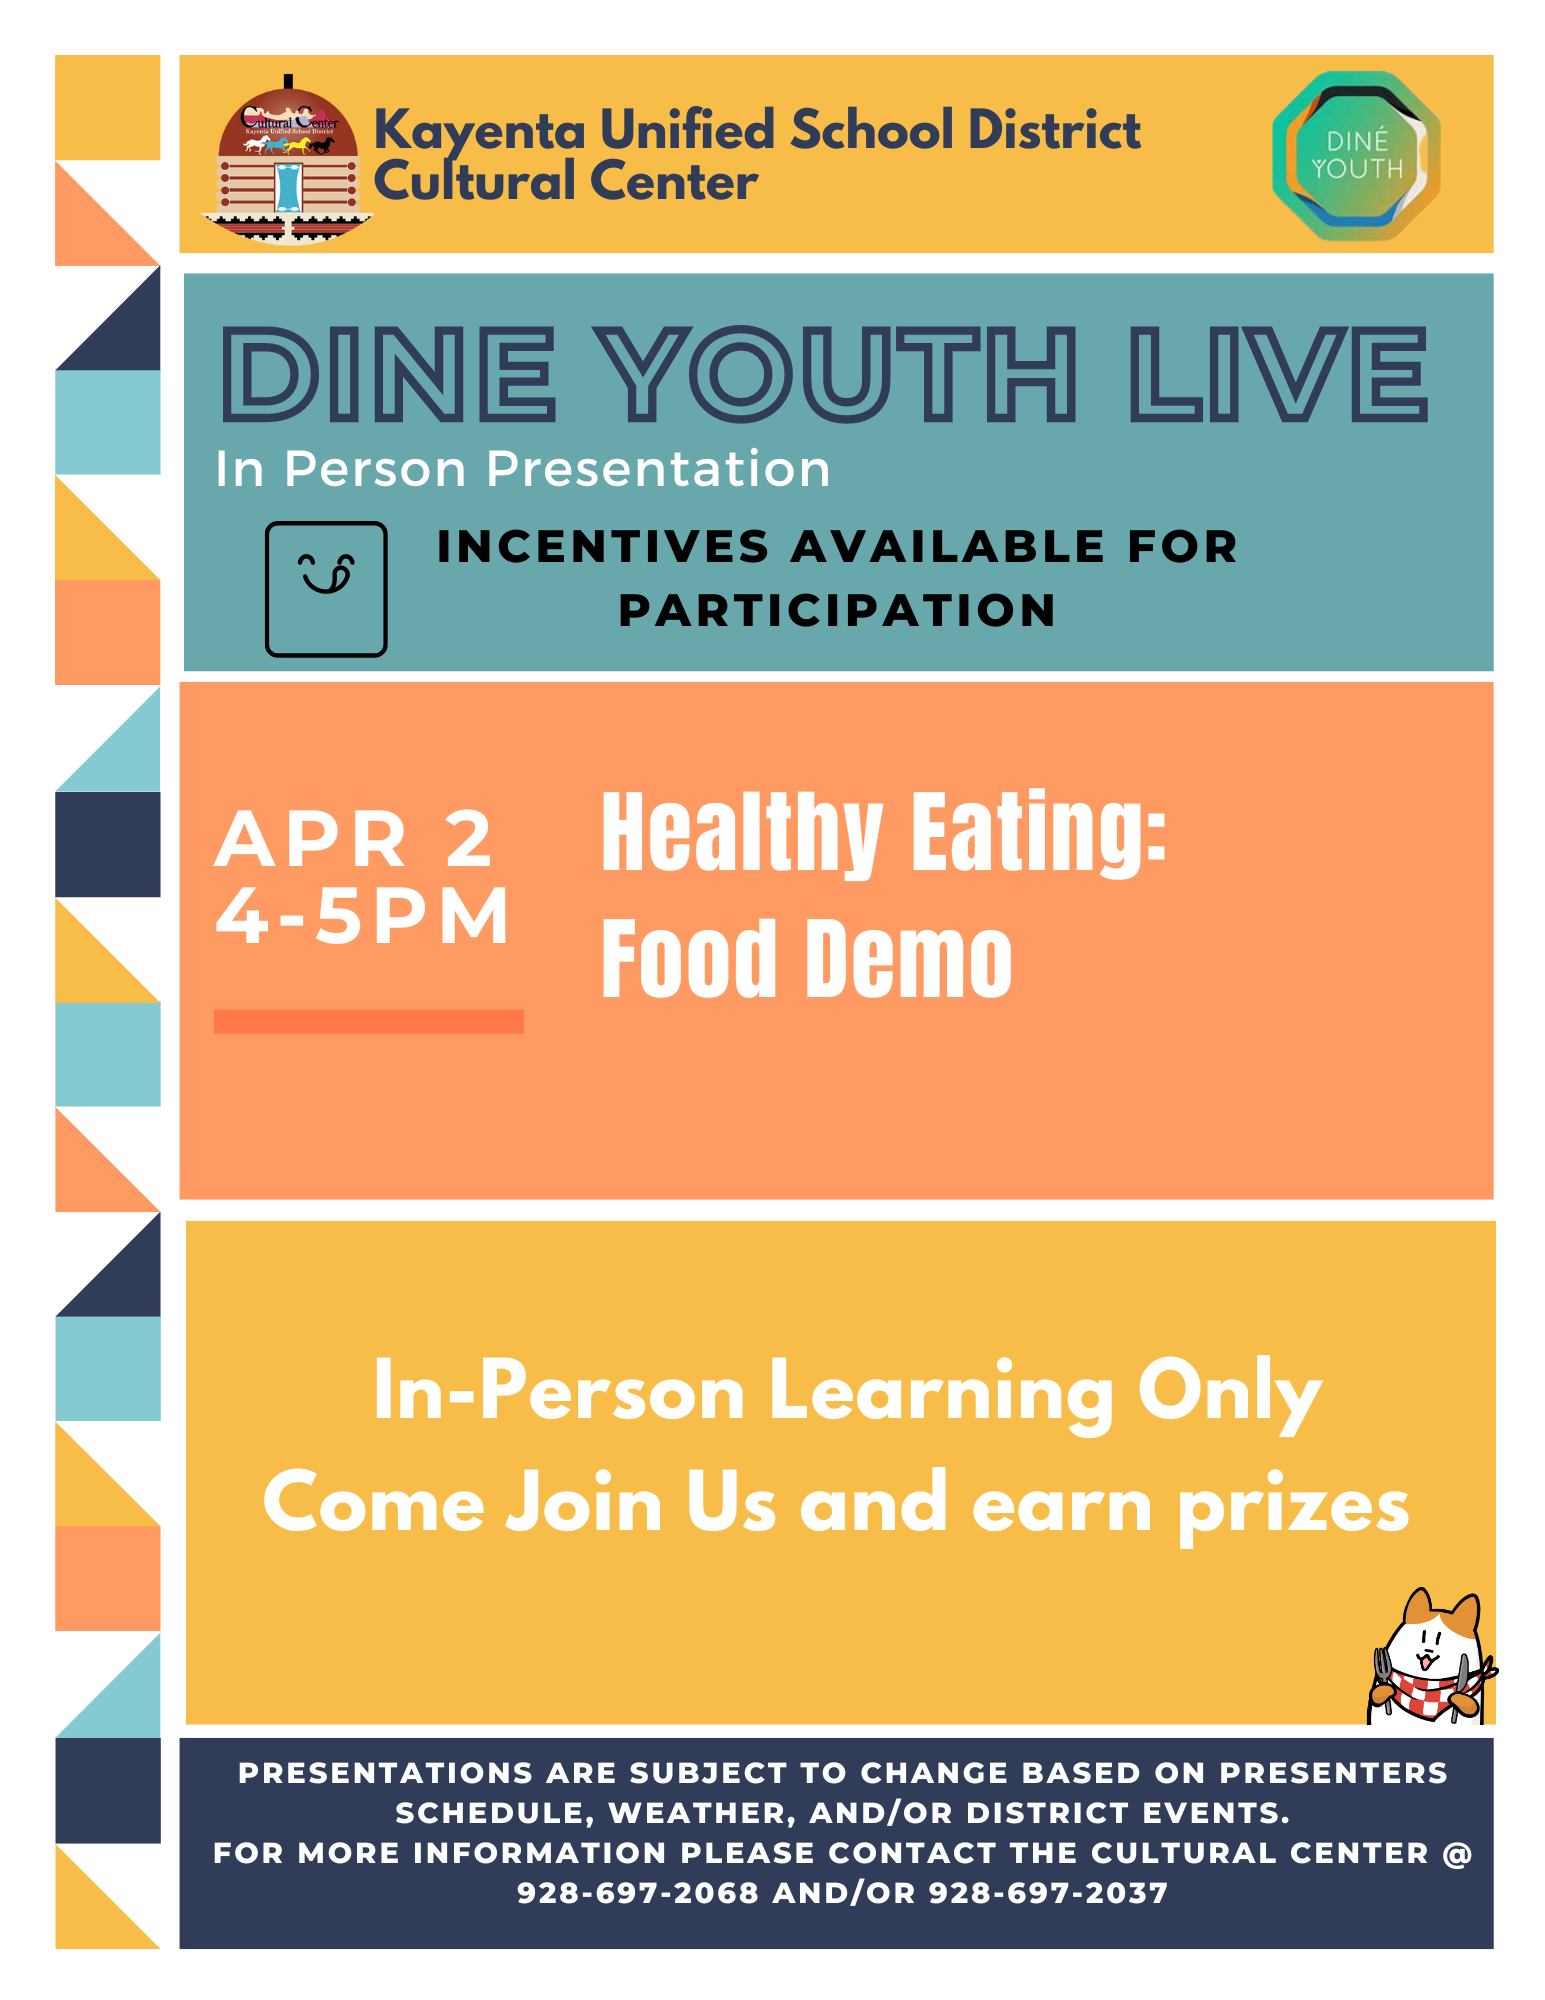 Dine Youth Live